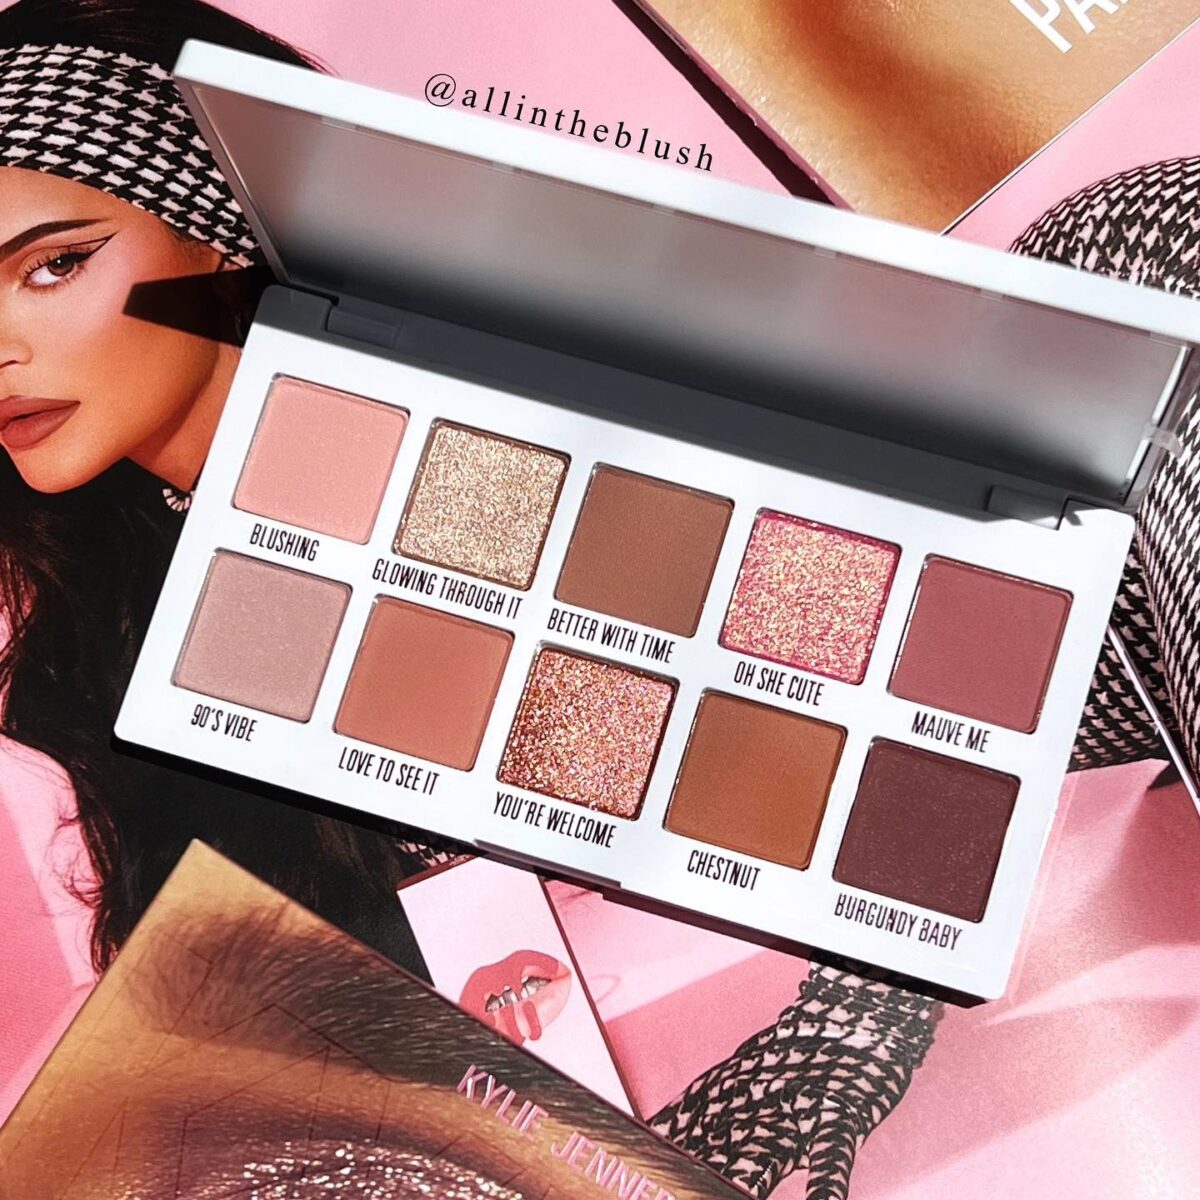 NEW Kylie Cosmetics The Bronze & Mauve Palettes - Review & Swatches